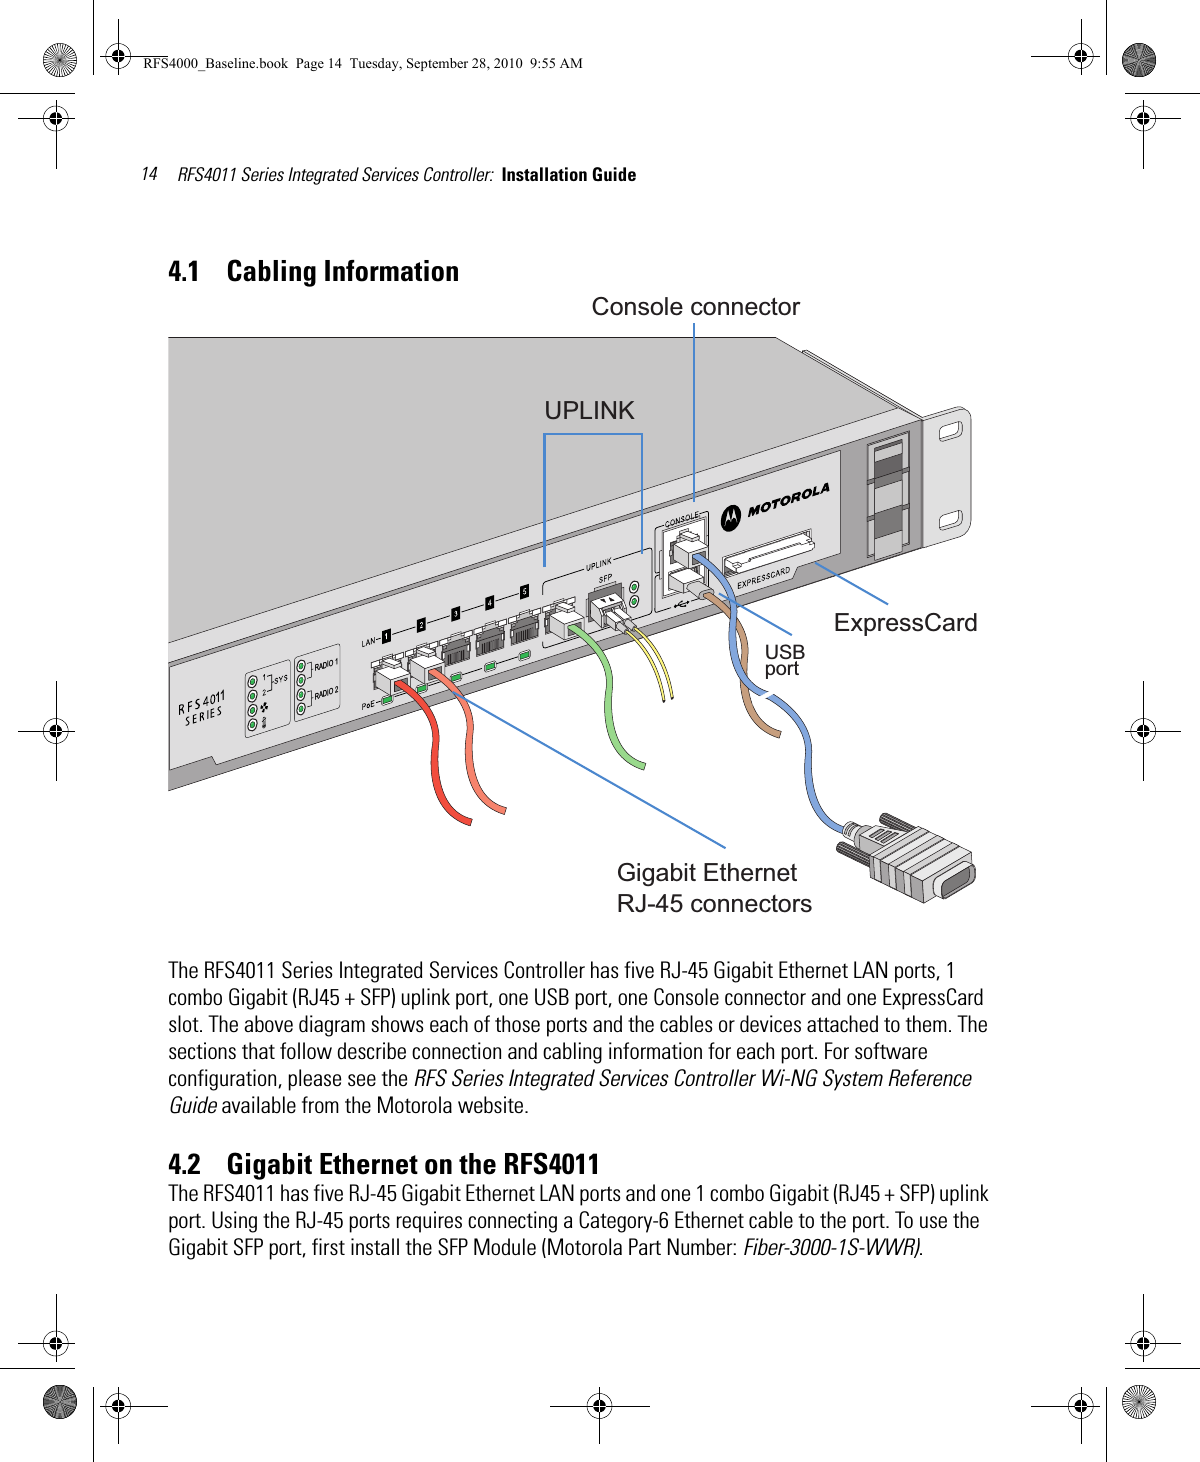 RFS4011 Series Integrated Services Controller:  Installation Guide 144.1    Cabling InformationThe RFS4011 Series Integrated Services Controller has five RJ-45 Gigabit Ethernet LAN ports, 1 combo Gigabit (RJ45 + SFP) uplink port, one USB port, one Console connector and one ExpressCard slot. The above diagram shows each of those ports and the cables or devices attached to them. The sections that follow describe connection and cabling information for each port. For software configuration, please see the RFS Series Integrated Services Controller Wi-NG System Reference Guide available from the Motorola website.4.2    Gigabit Ethernet on the RFS4011The RFS4011 has five RJ-45 Gigabit Ethernet LAN ports and one 1 combo Gigabit (RJ45 + SFP) uplink port. Using the RJ-45 ports requires connecting a Category-6 Ethernet cable to the port. To use the Gigabit SFP port, first install the SFP Module (Motorola Part Number: Fiber-3000-1S-WWR).Gigabit EthernetRJ-45 connectorsUPLINKConsole connectorUSBportExpressCardRADIO 1RADIO 211RFS4000_Baseline.book  Page 14  Tuesday, September 28, 2010  9:55 AM